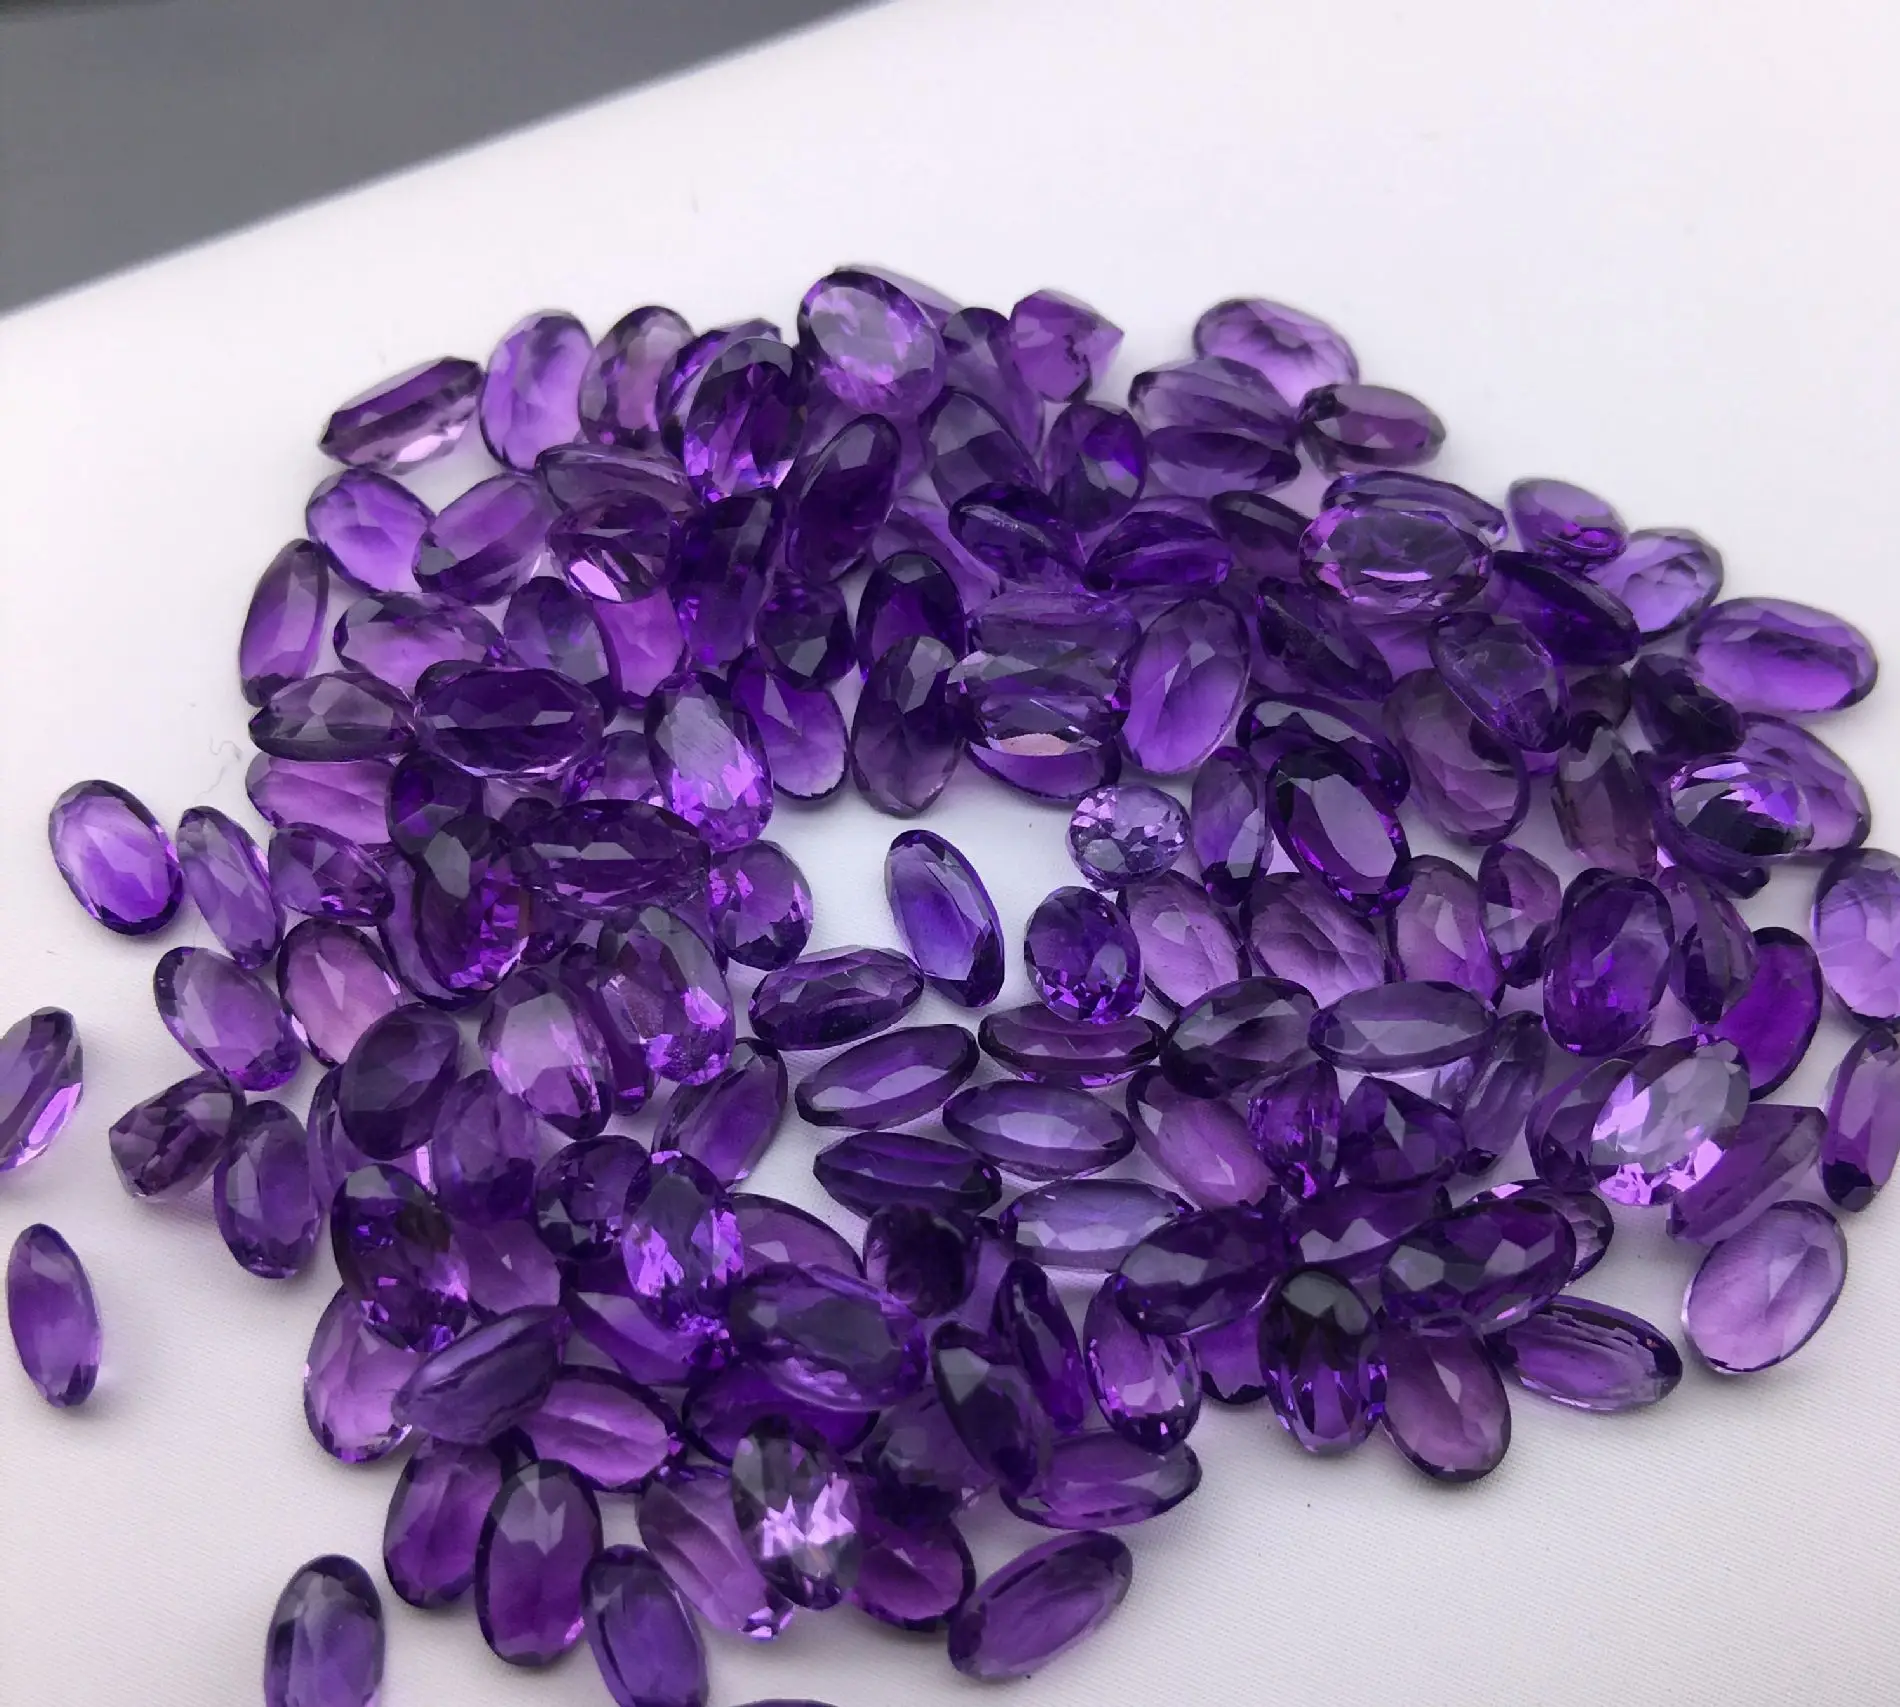 

Wholesale 10pcs/pack Genuine Amethyst Brilliant-cut Cabochon 3x5mm 4x6mm 5x7mm 6x8mm 7x9mm Oval Gemstone Ring Face For Jewelry